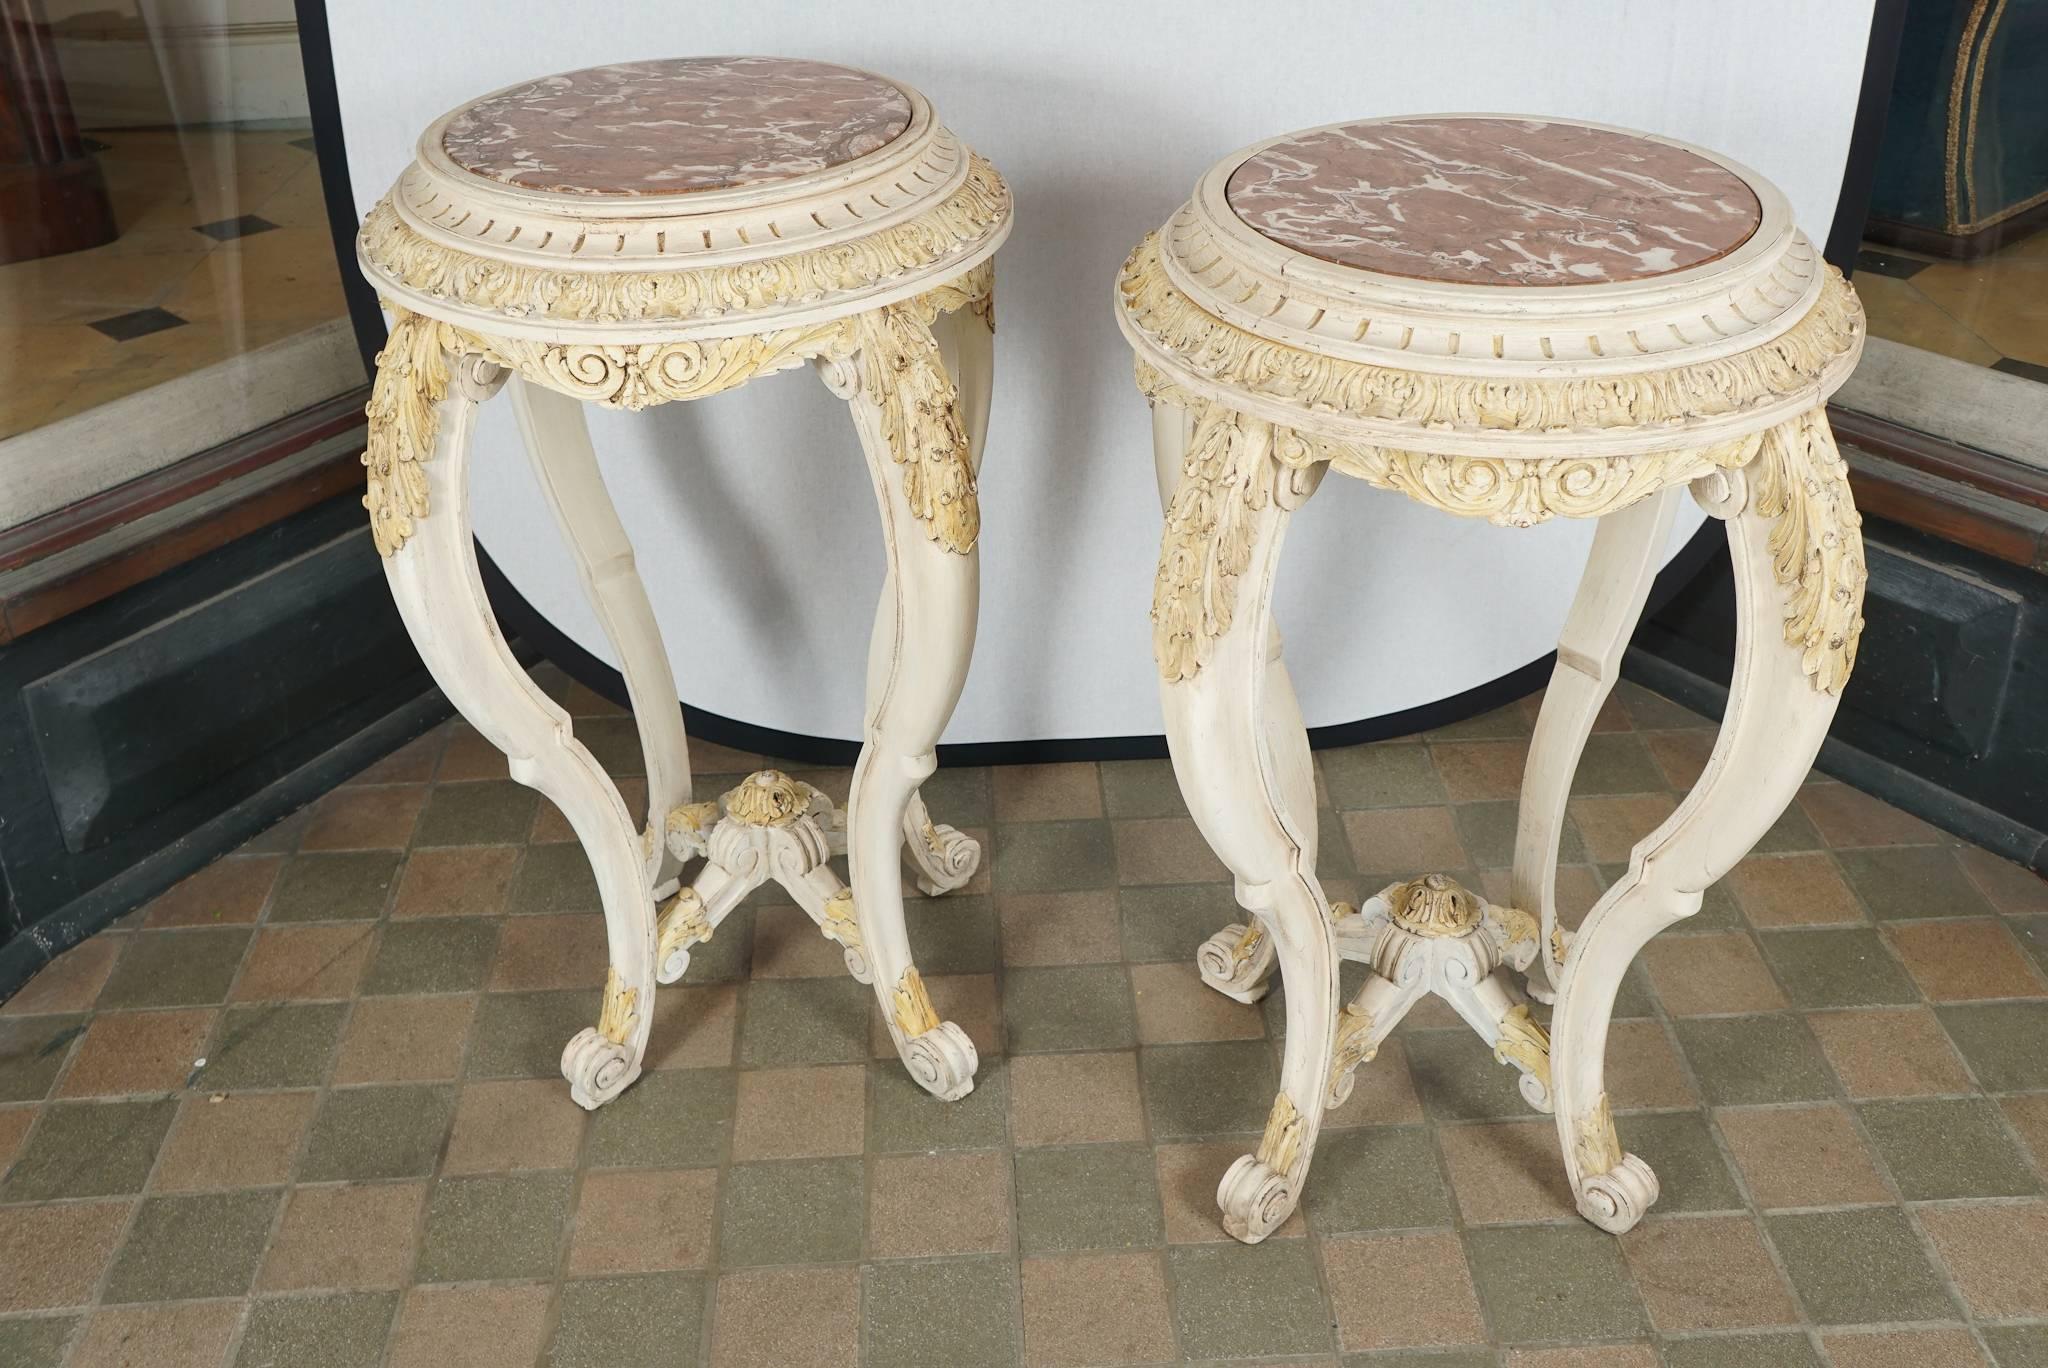 The pair of tables was made in France between 1890 and 1900. Designed in the Louis XV style the pair has extensive hand-carved decorative elements including acanthus leaves, fluting and rosettes all picked out from the cream ground in a light ocher